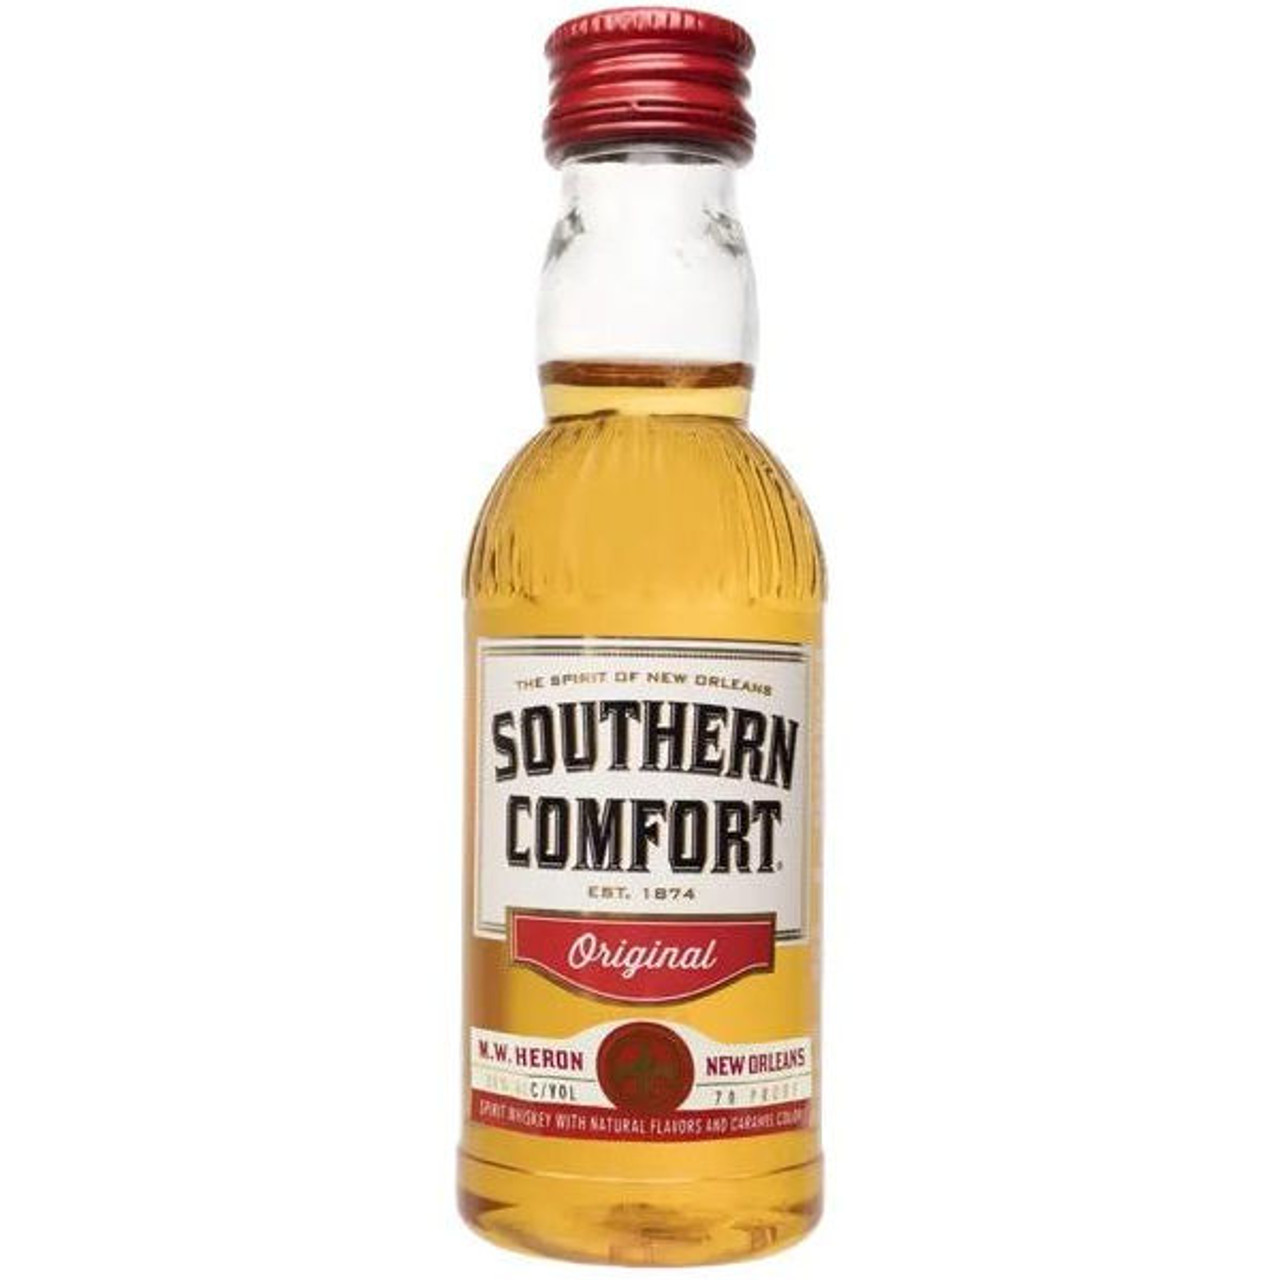 Southern Comfort Original 70 Proof Whiskey 750ml